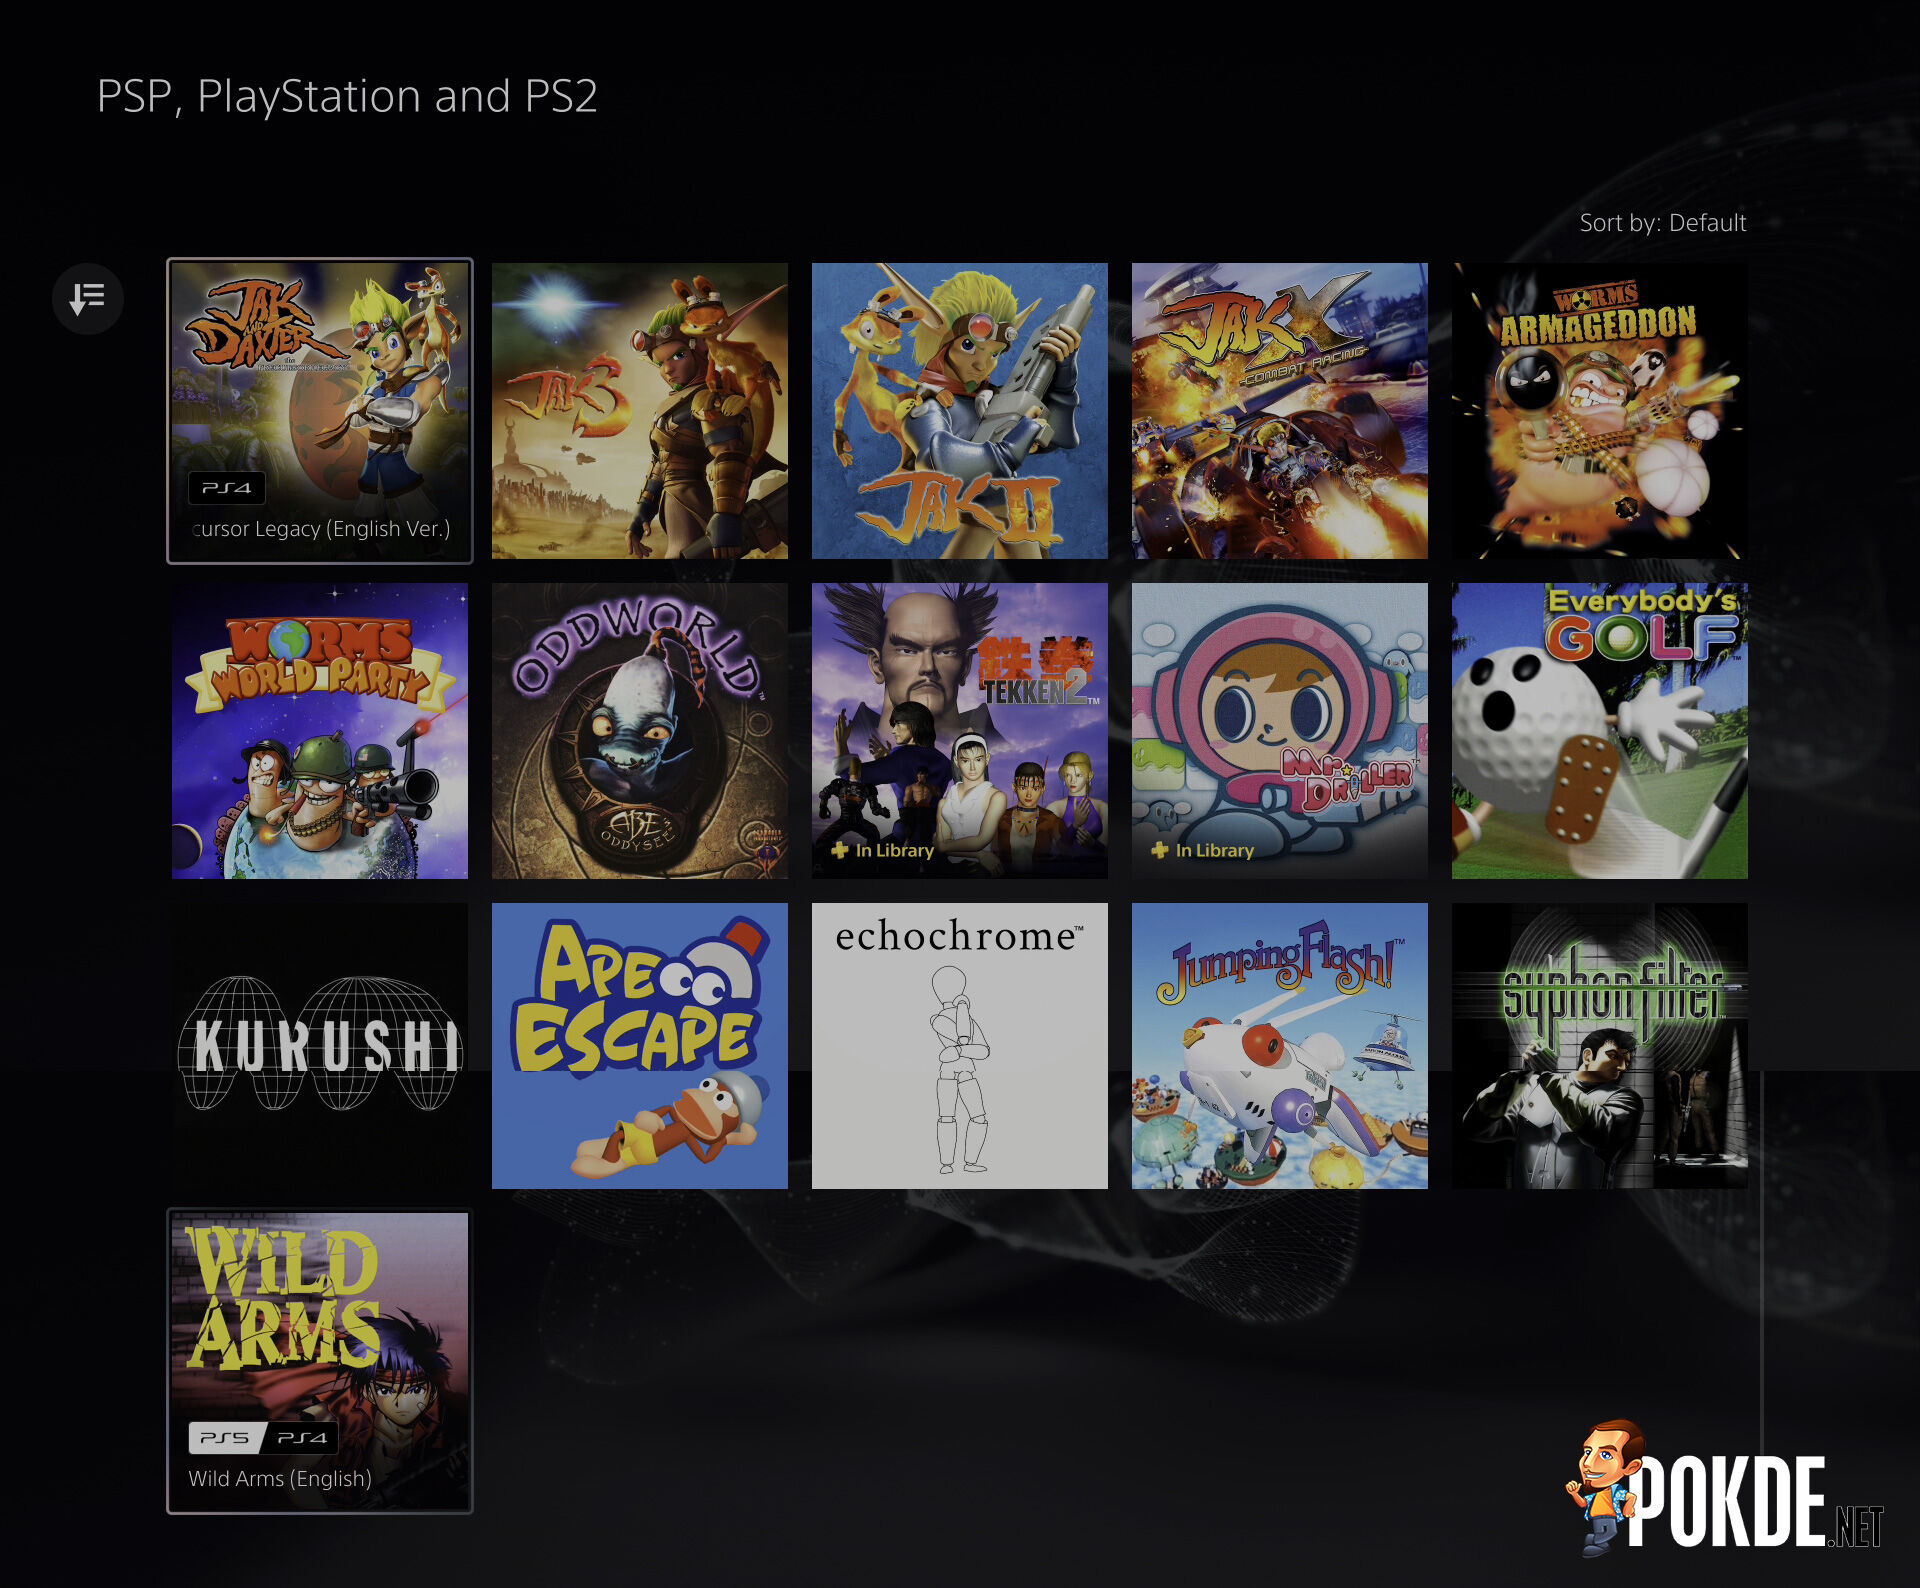 PS1 Features for PS+ Premium and PS+ Deluxe, revealed